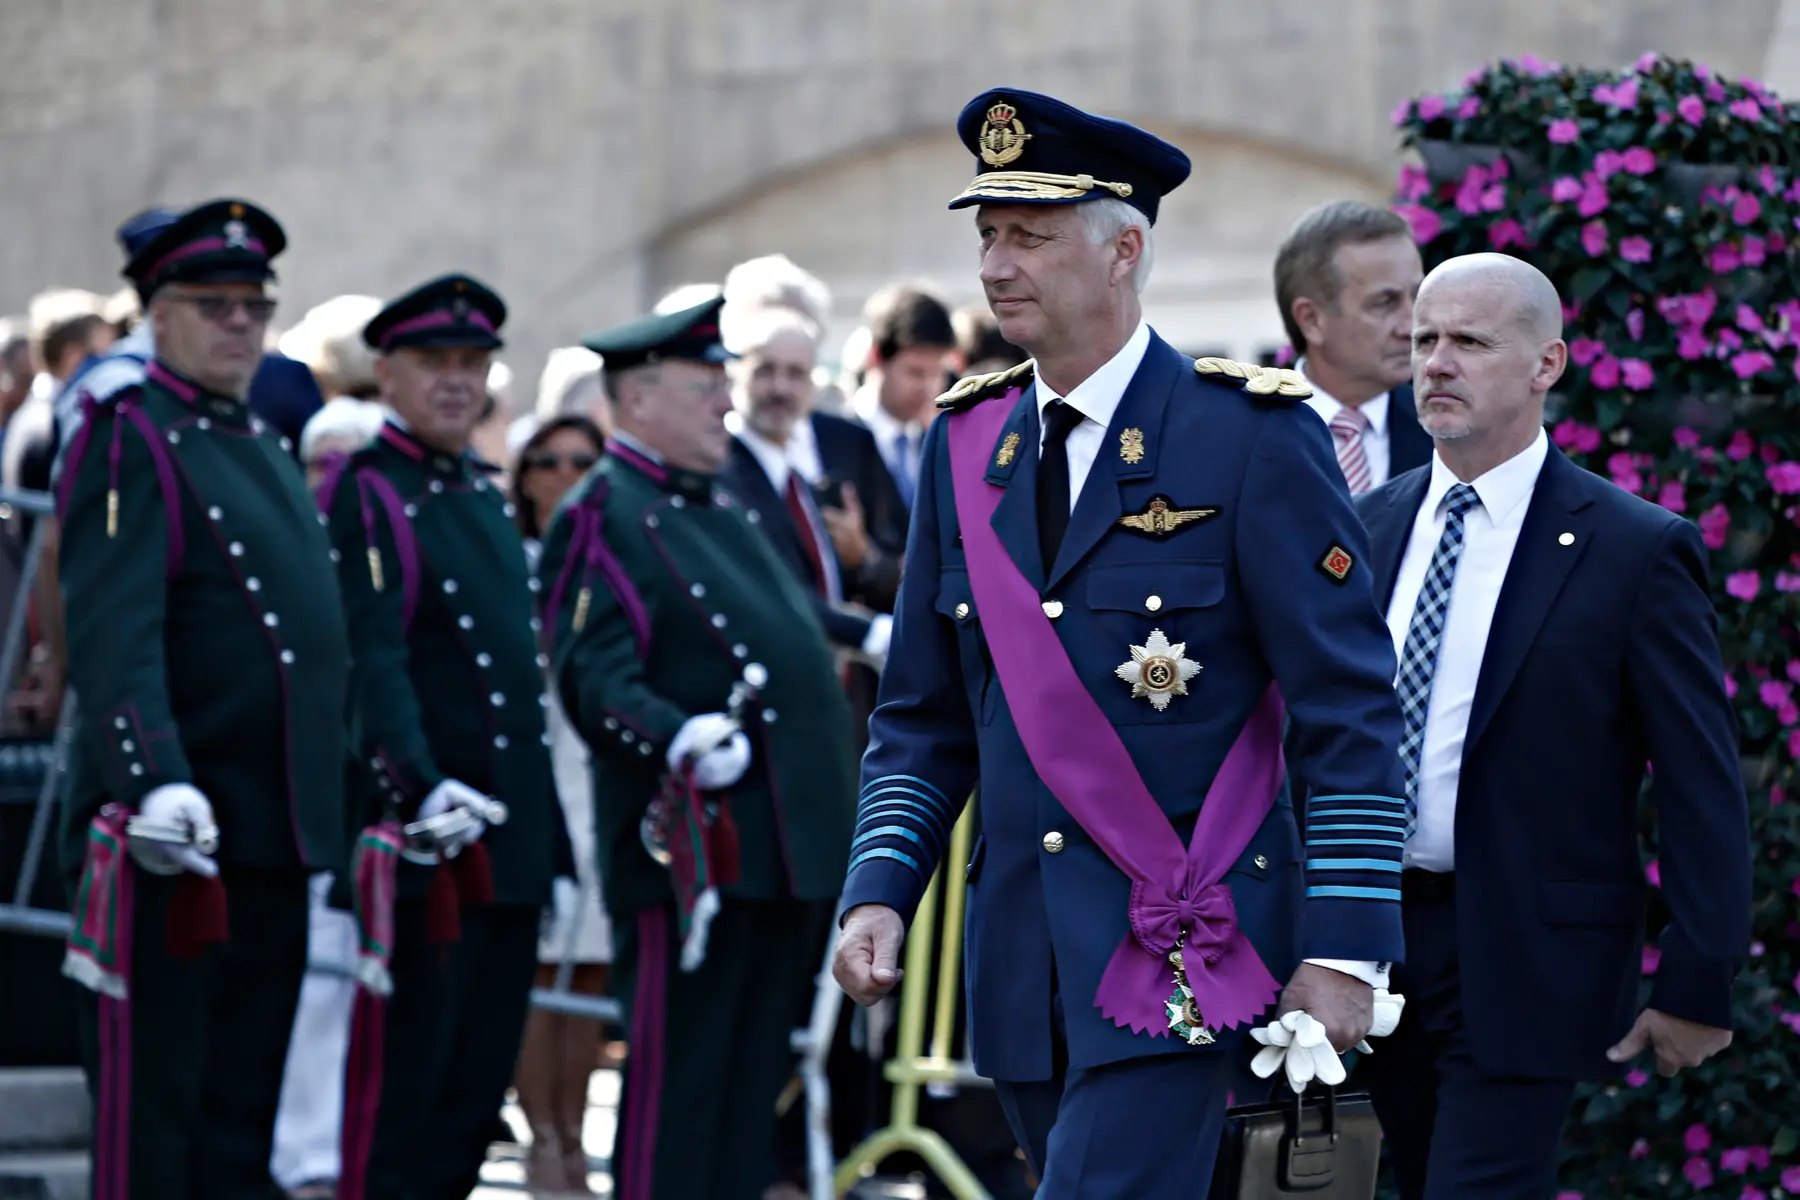 King Philippe at an event in Brussels